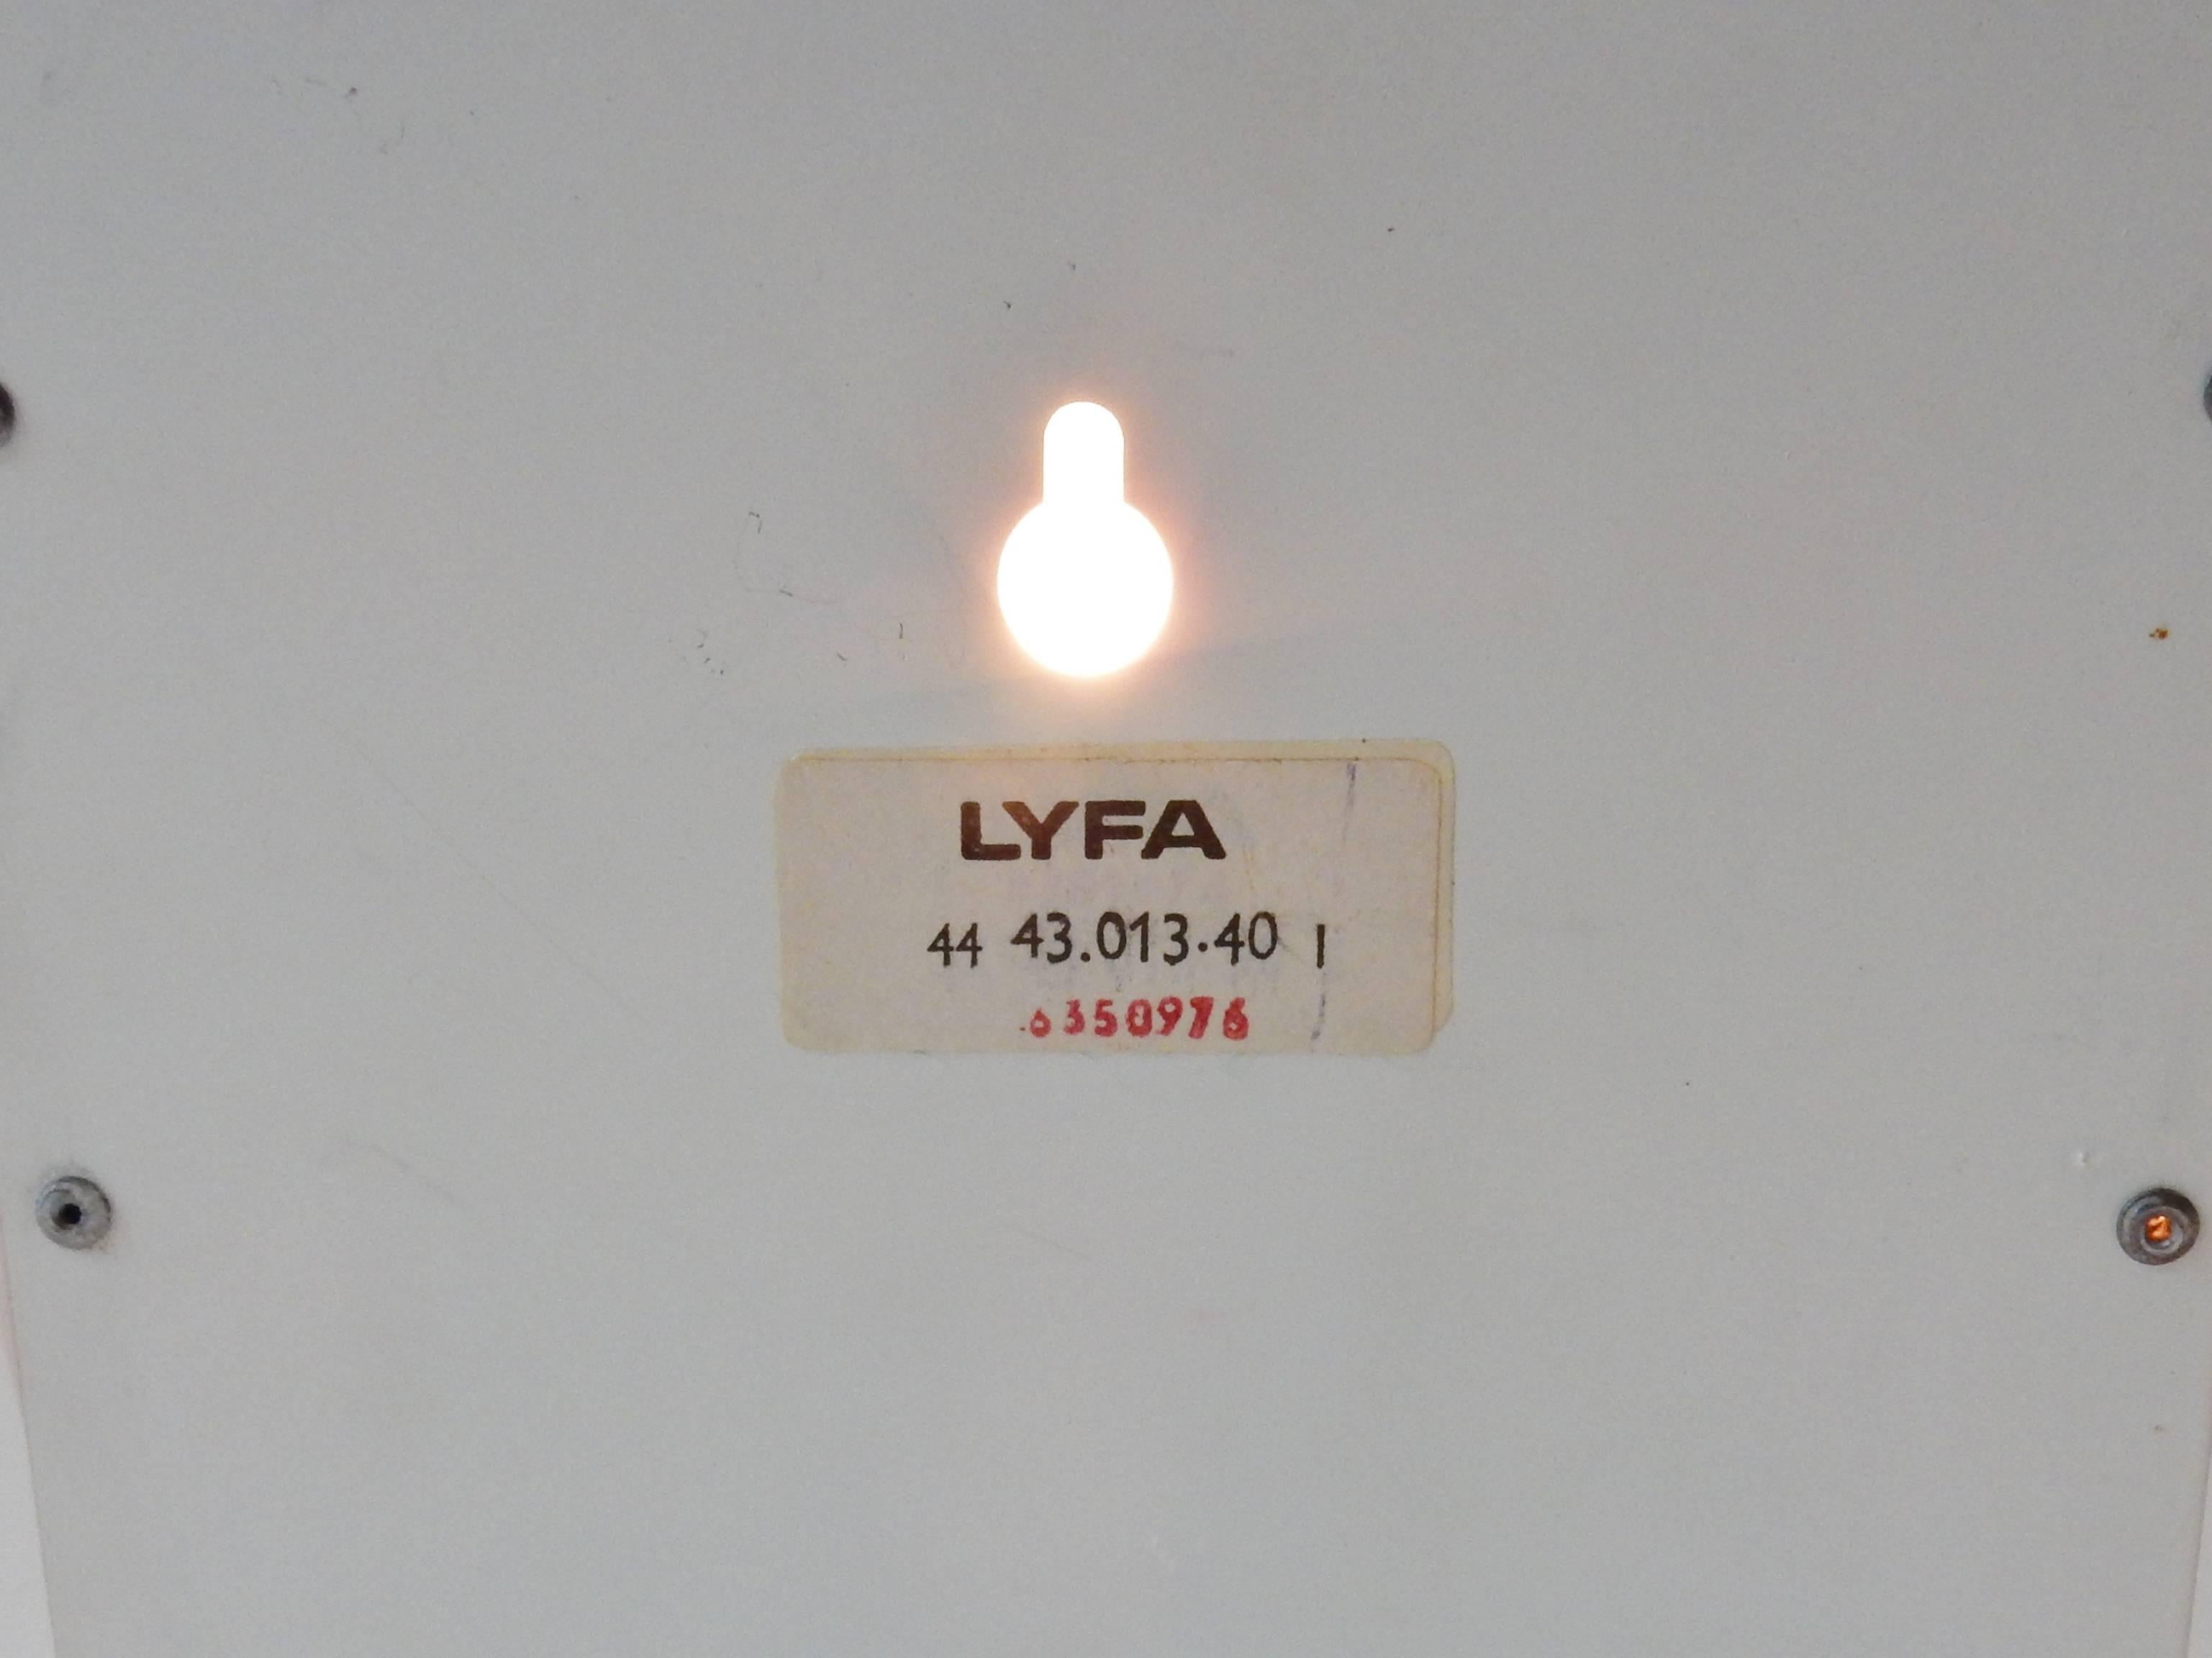 Lacquered Set of Two Wall Lights by Lyfa, Denmark, Late 1960s-Early 1970s